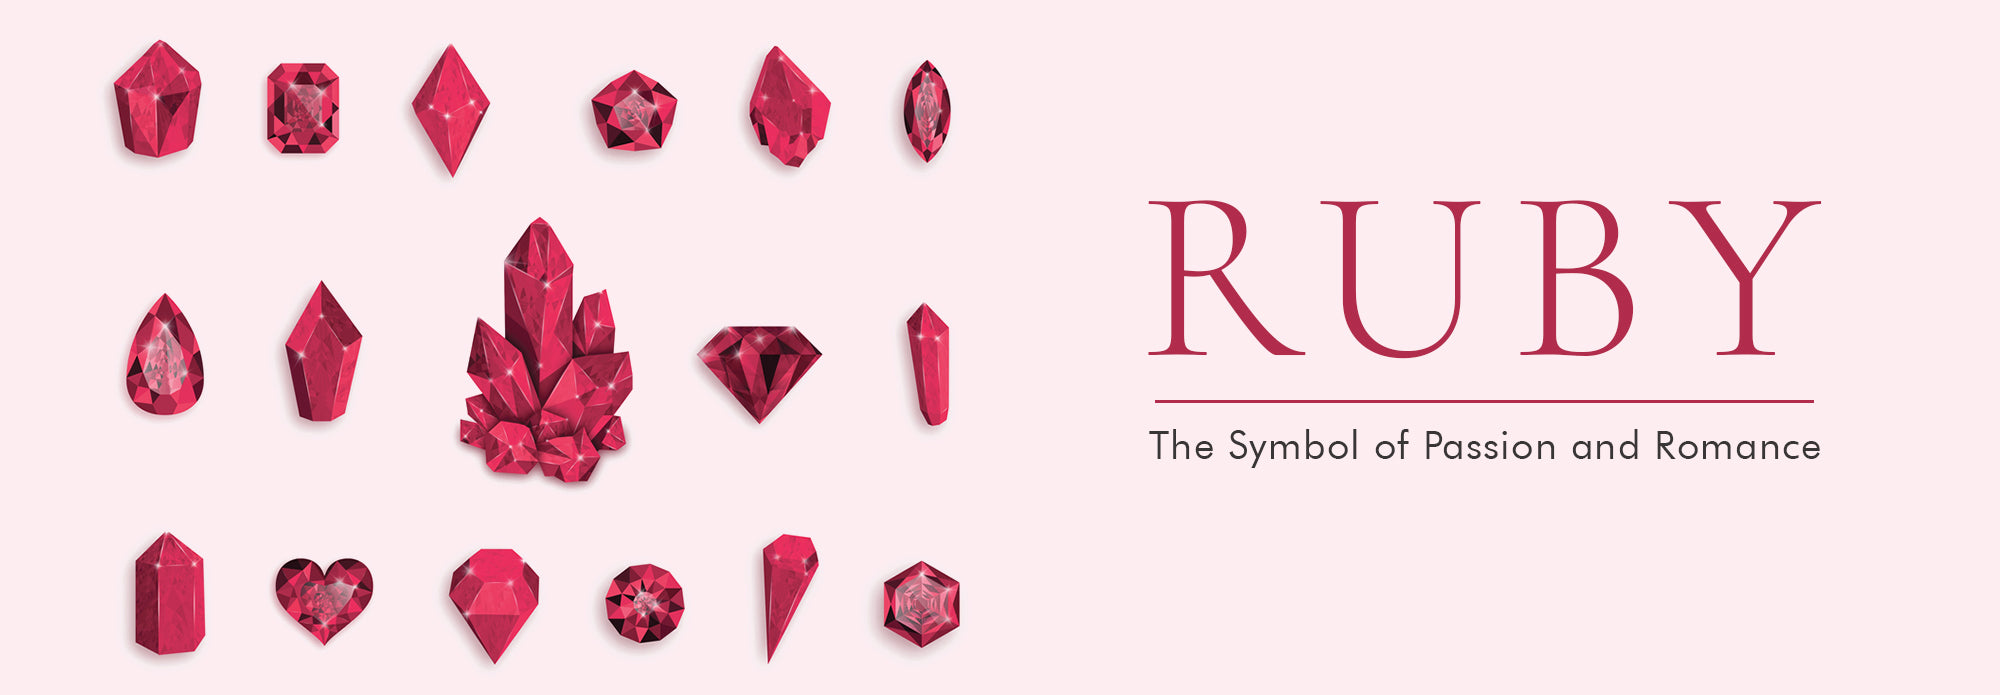 Ruby: The Symbol of Passion and Romance